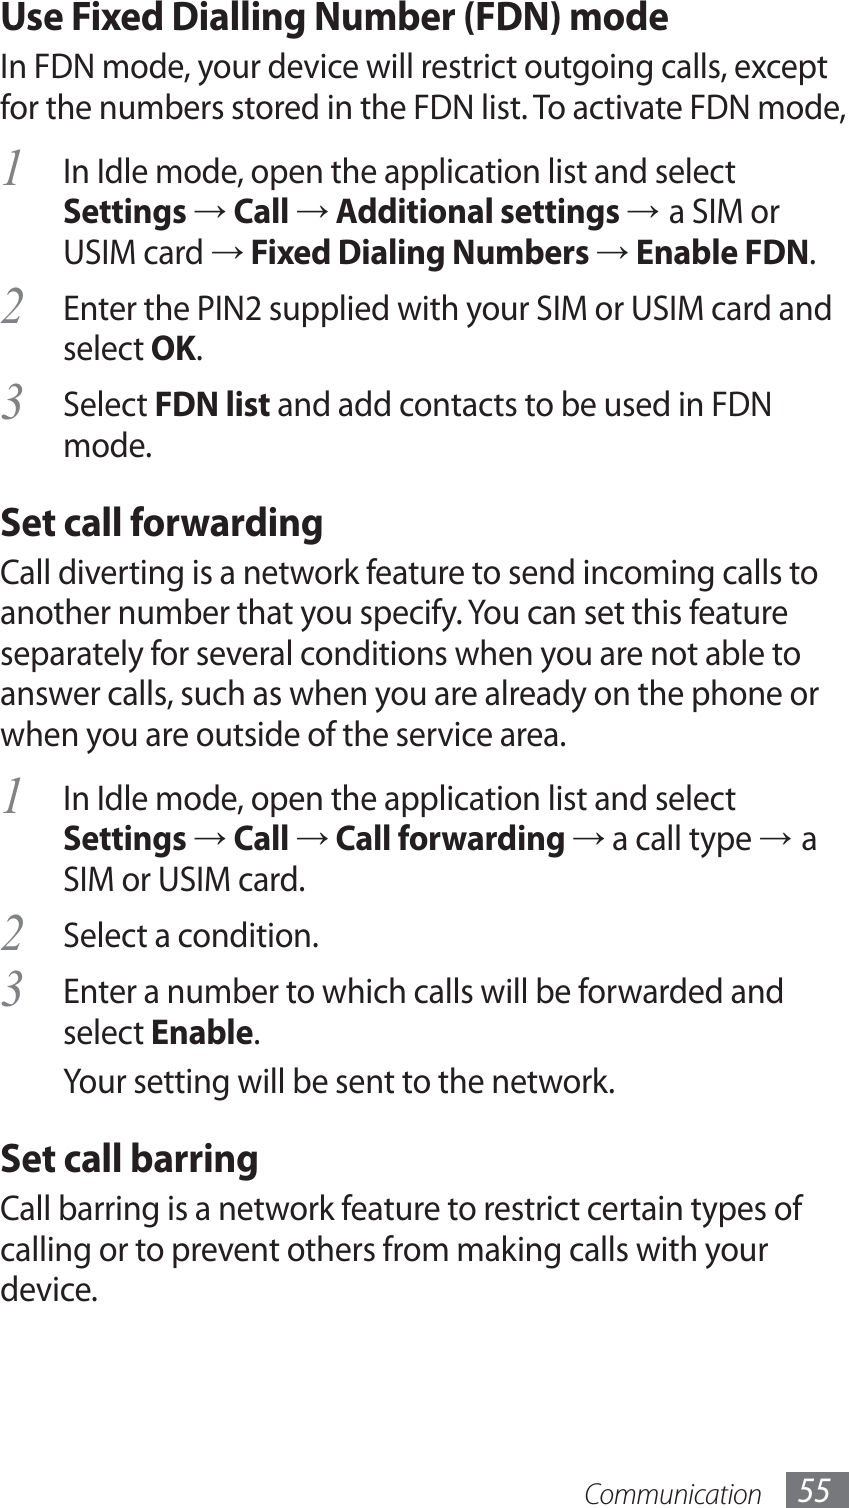 Communication 55Use Fixed Dialling Number (FDN) modeIn FDN mode, your device will restrict outgoing calls, except for the numbers stored in the FDN list. To activate FDN mode, In Idle mode, open the application list and select 1 Settings → Call → Additional settings → a SIM or USIM card → Fixed Dialing Numbers → Enable FDN.Enter the PIN2 supplied with your SIM or USIM card and 2 select OK.Select 3 FDN list and add contacts to be used in FDN mode.Set call forwardingCall diverting is a network feature to send incoming calls to another number that you specify. You can set this feature separately for several conditions when you are not able to answer calls, such as when you are already on the phone or when you are outside of the service area.In Idle mode, open the application list and select 1 Settings → Call → Call forwarding → a call type → a SIM or USIM card.Select a condition.2 Enter a number to which calls will be forwarded and 3 select Enable.Your setting will be sent to the network.Set call barringCall barring is a network feature to restrict certain types of calling or to prevent others from making calls with your device.